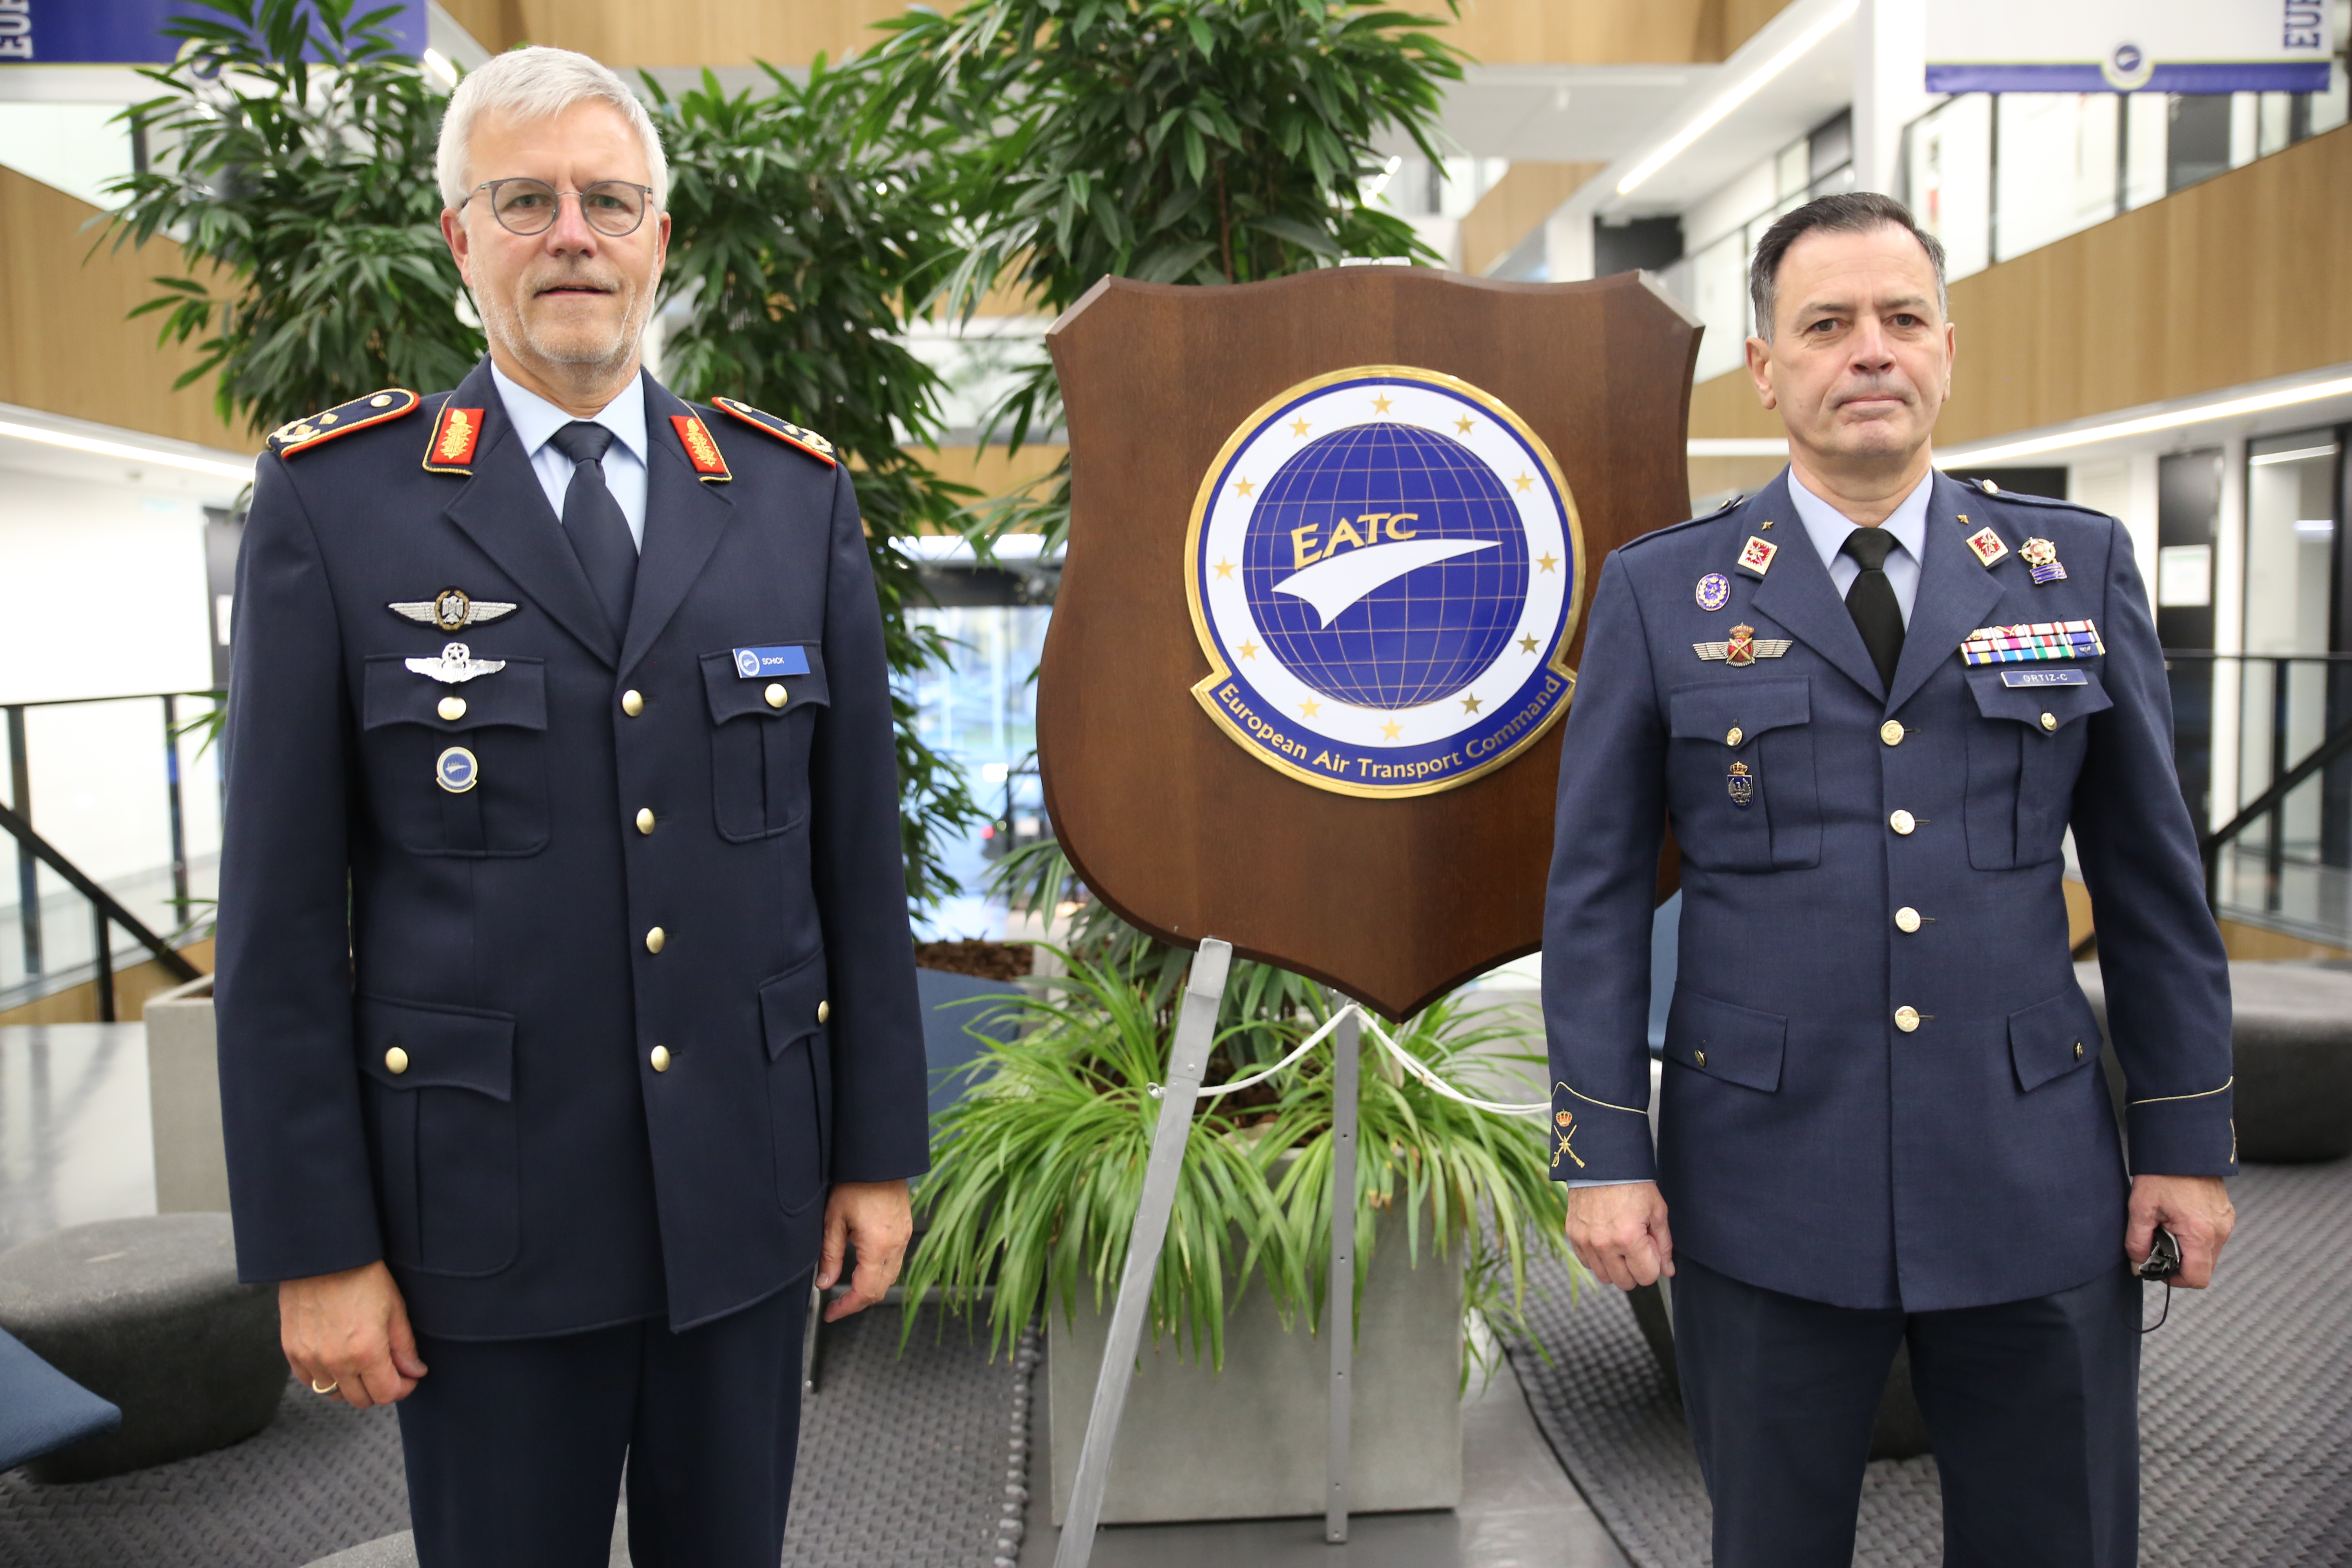 Spanish Commander of the Air Mobility Headquarters at EATC